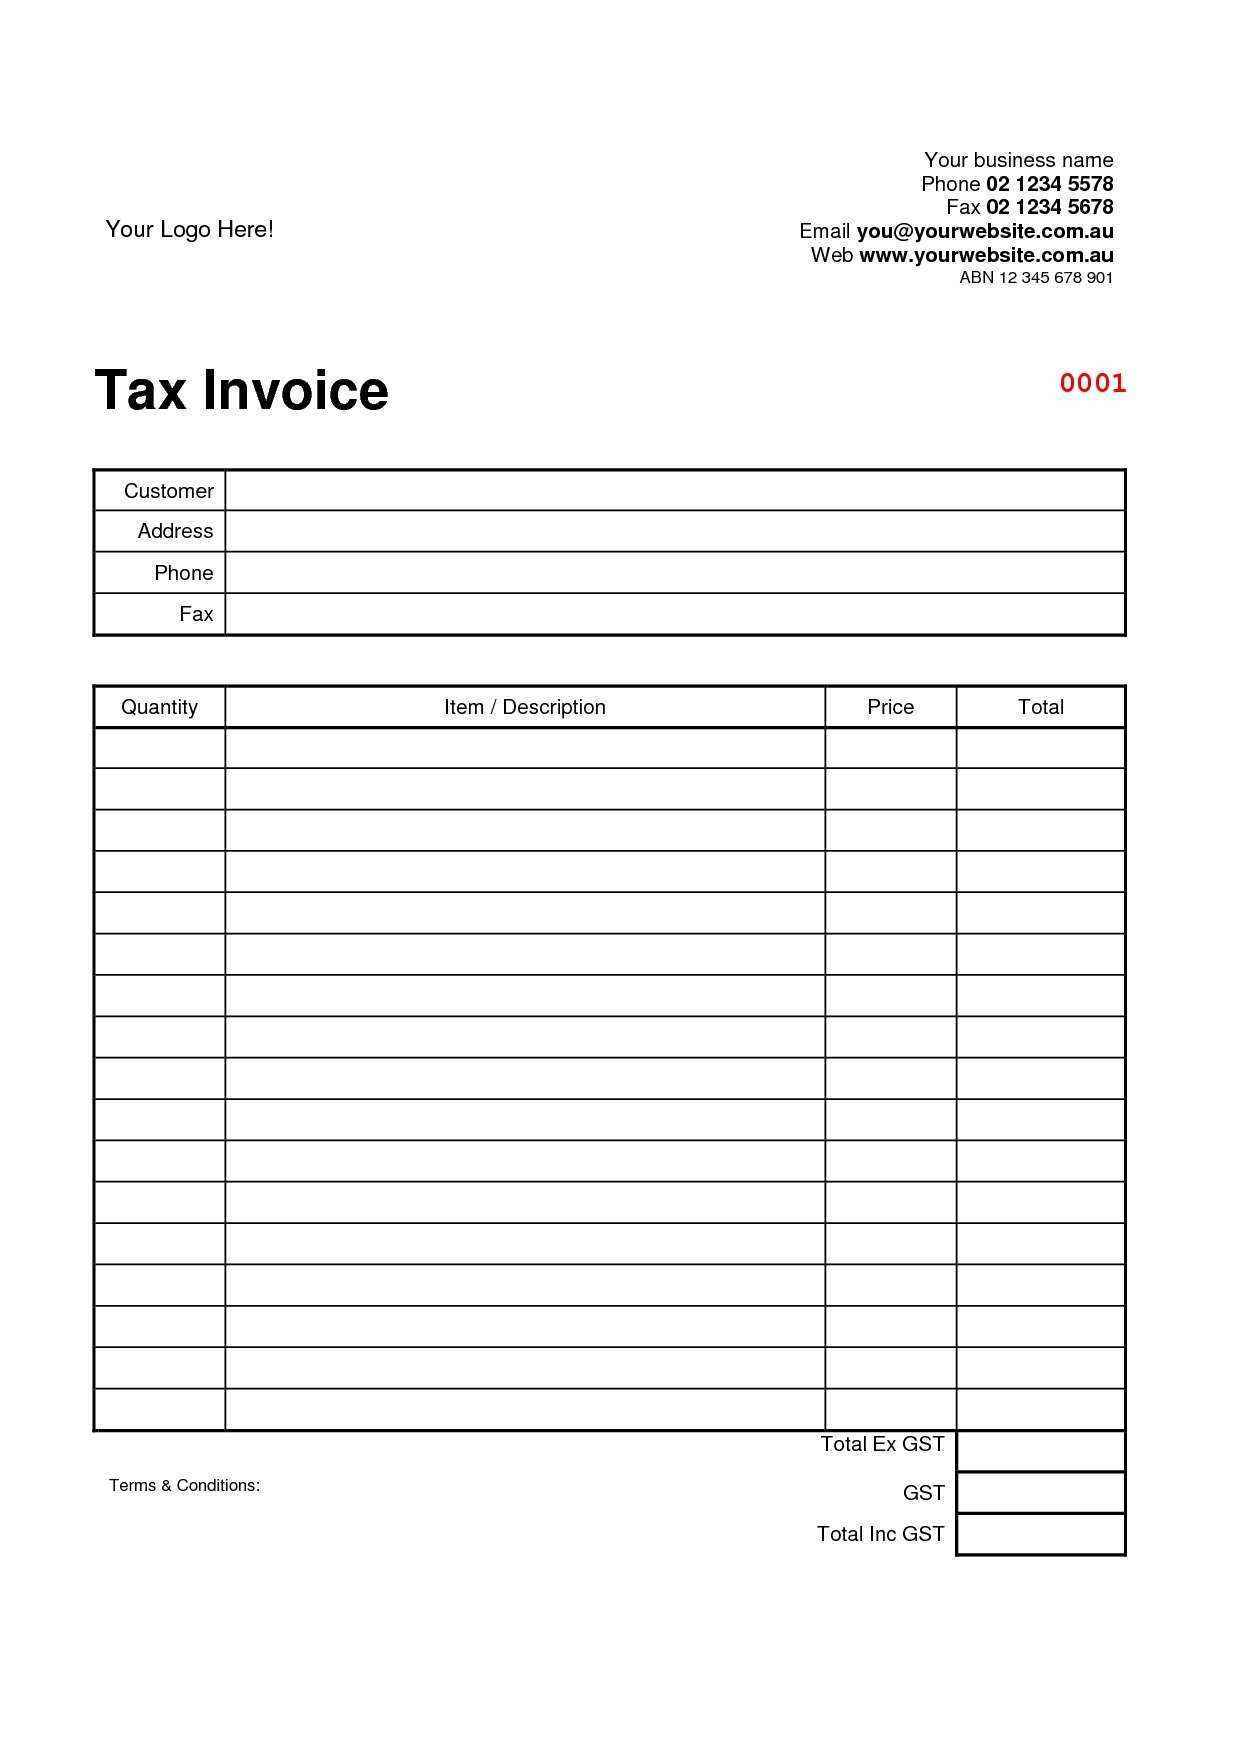 blank-invoice-format-in-excel-excel-templates-riset